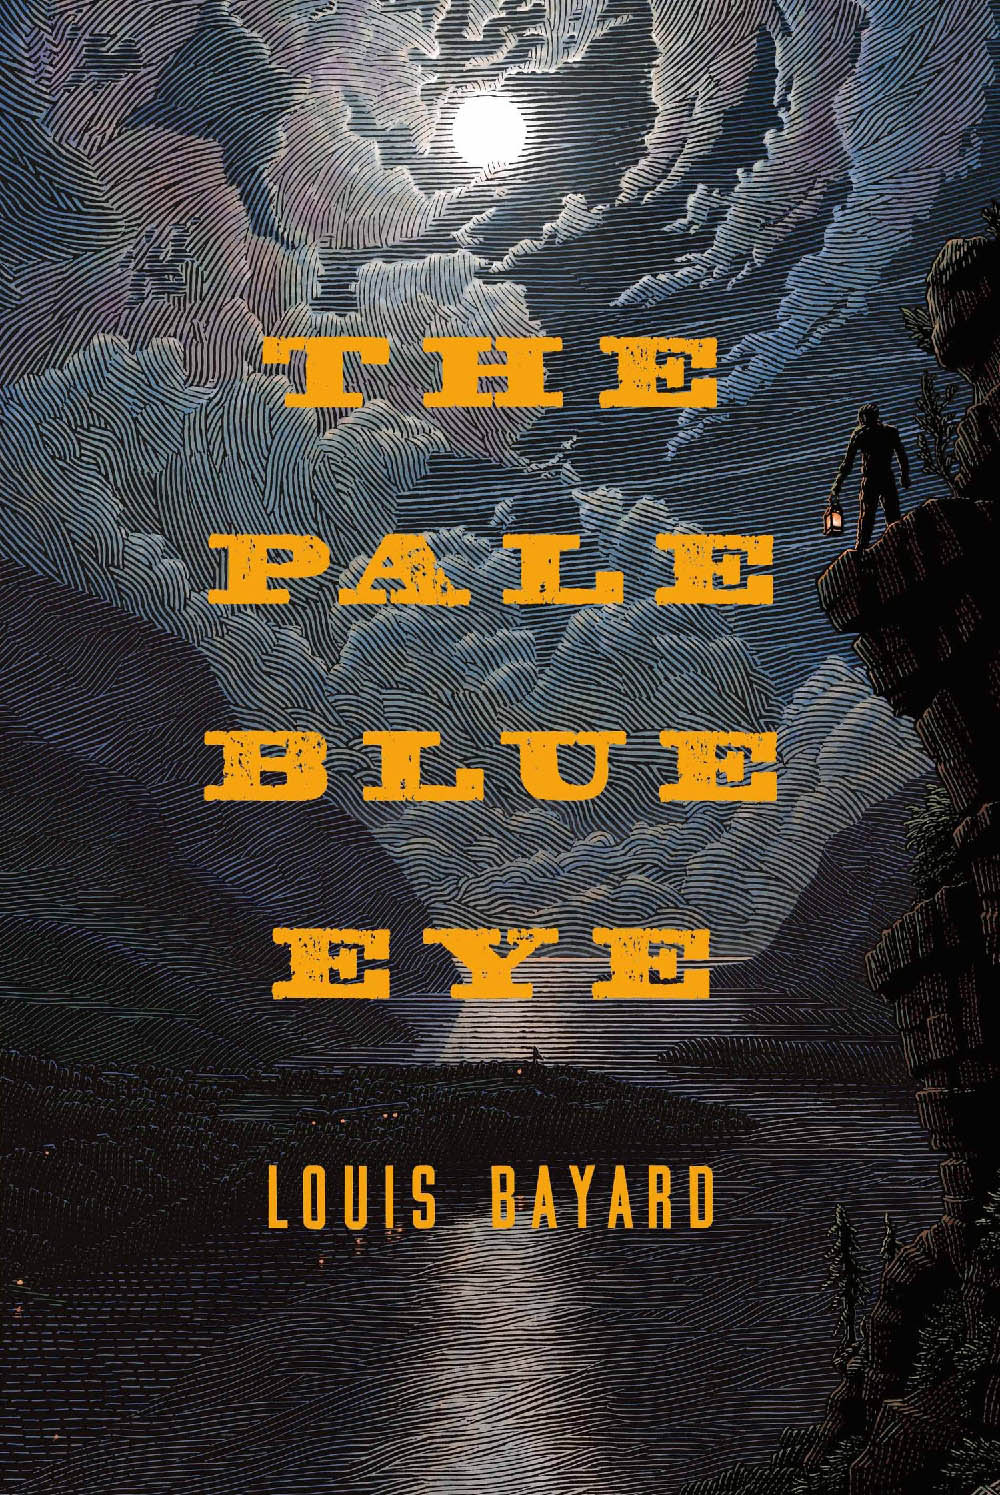 The Pale Blue Eye by Louis Bayard Signed & Numbered Hardcover